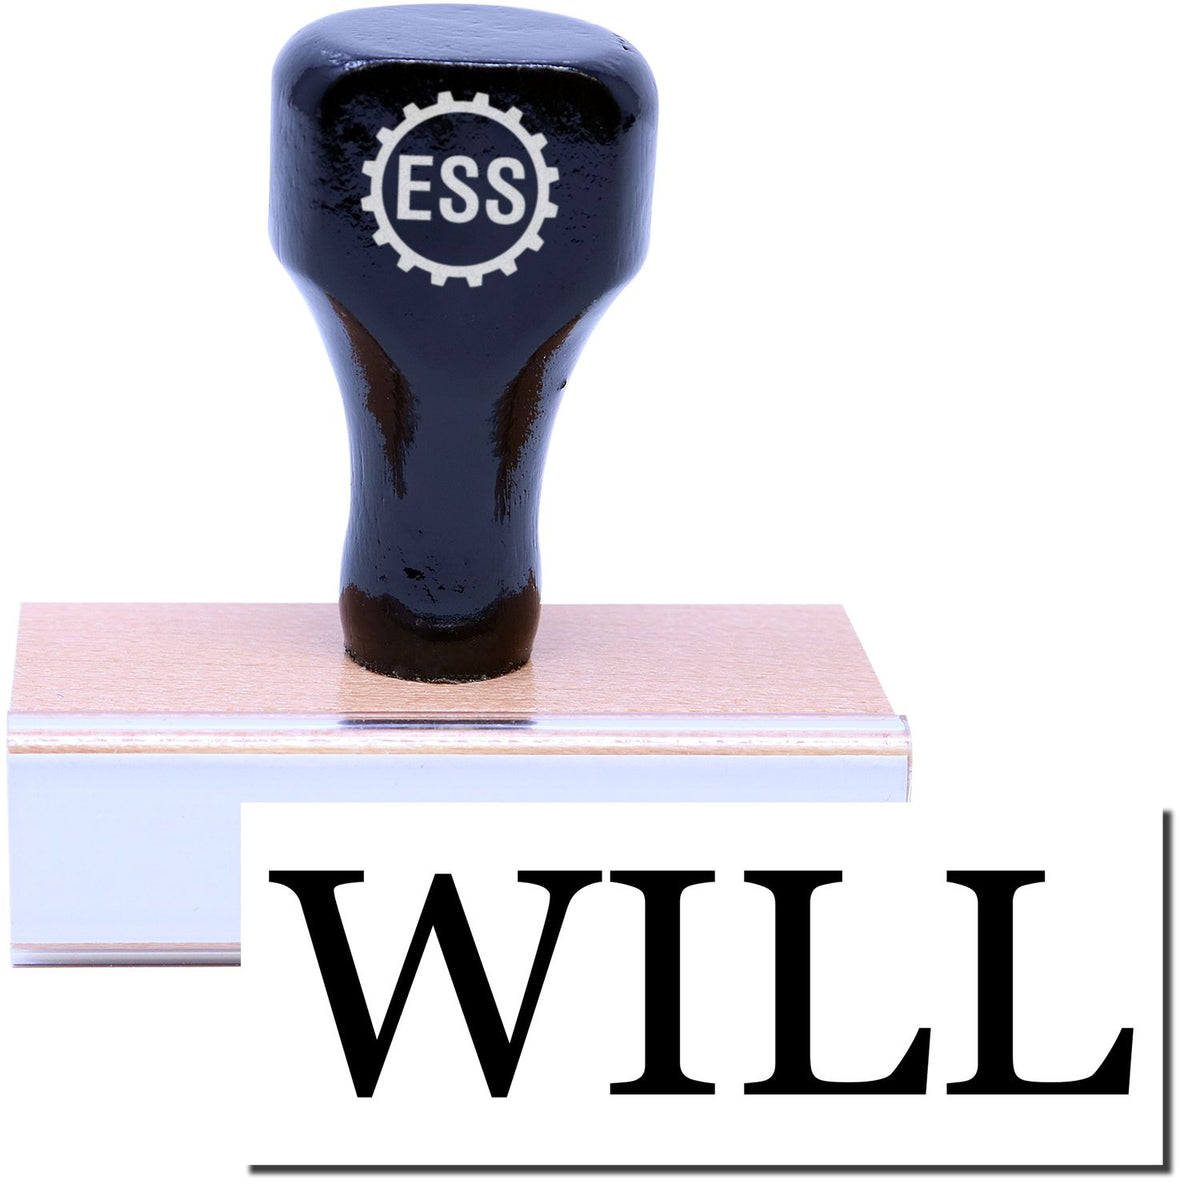 A stock office rubber stamp with a stamped image showing how the text &quot;WILL&quot; in a large font is displayed after stamping.